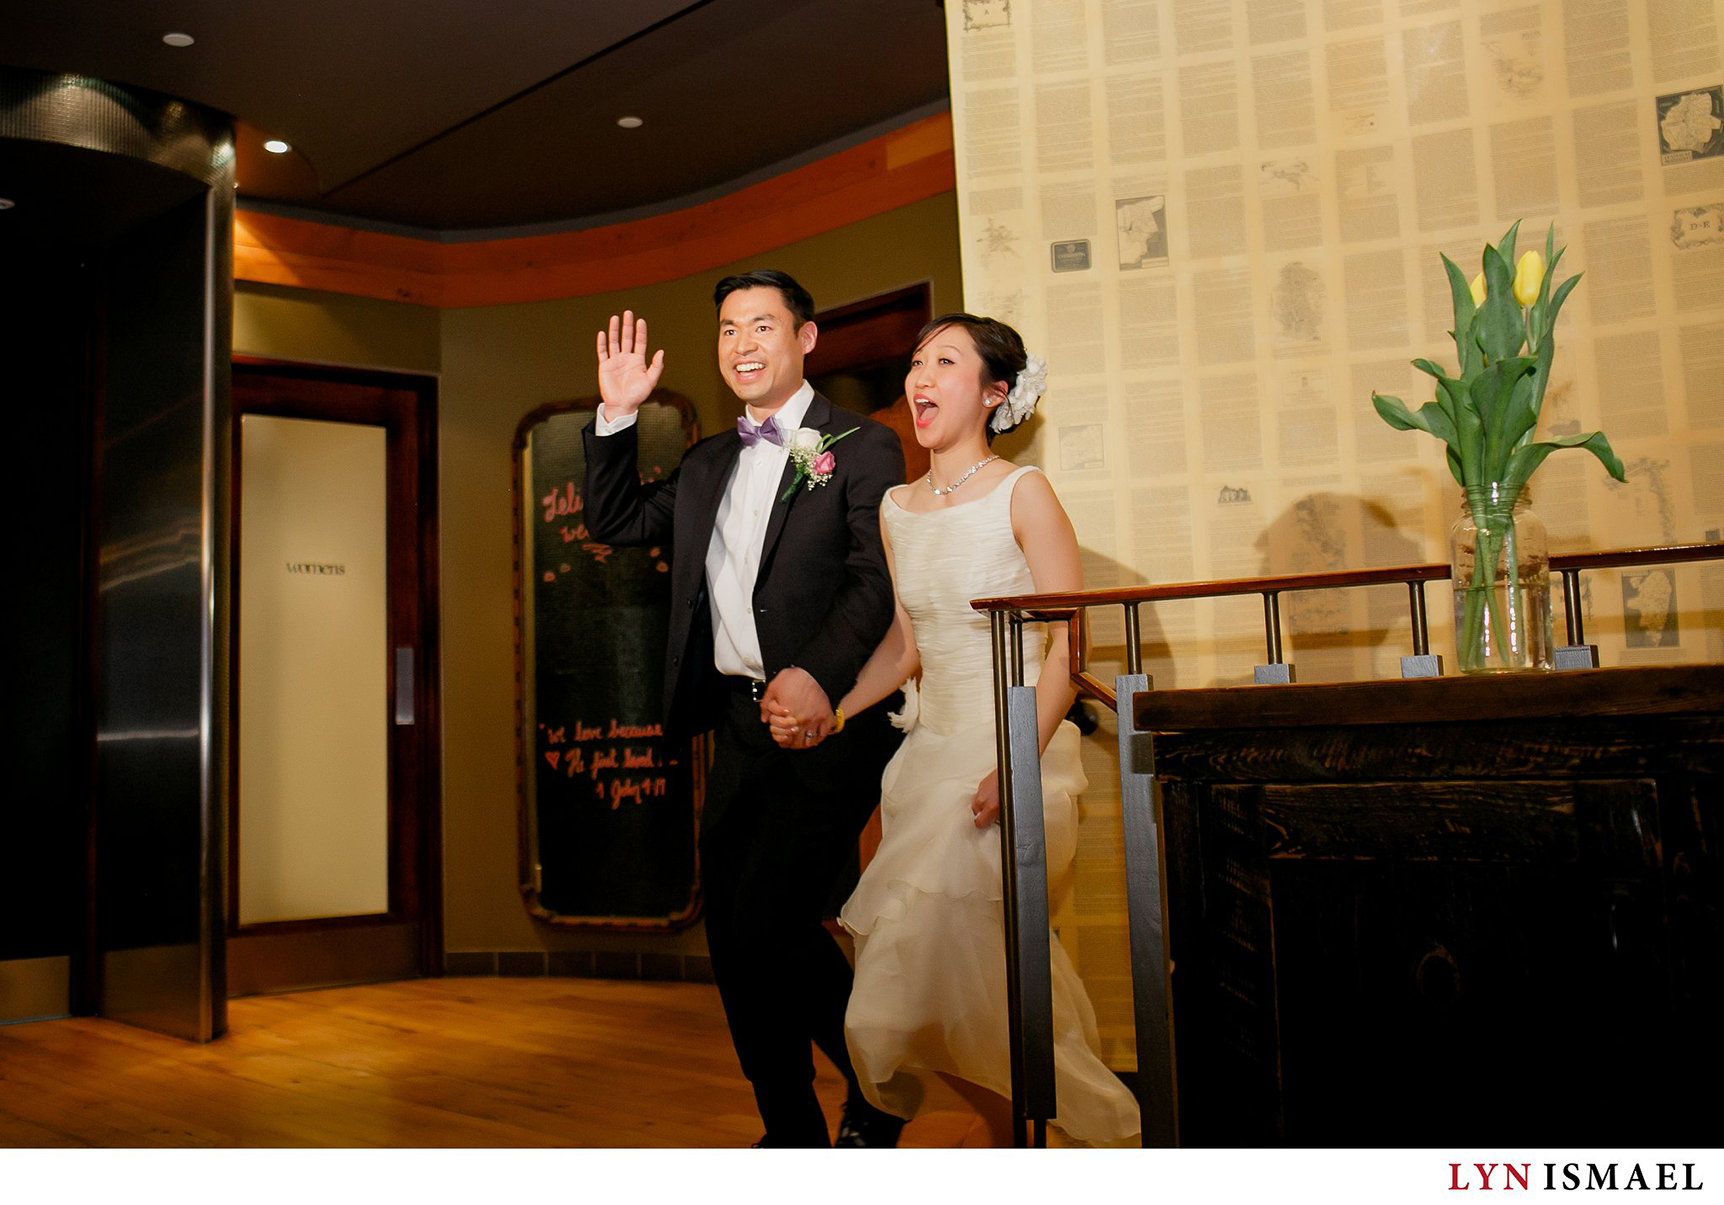 Bride and groom enters the reception area at Reds Wine Tavern in Toronto, Ontario.